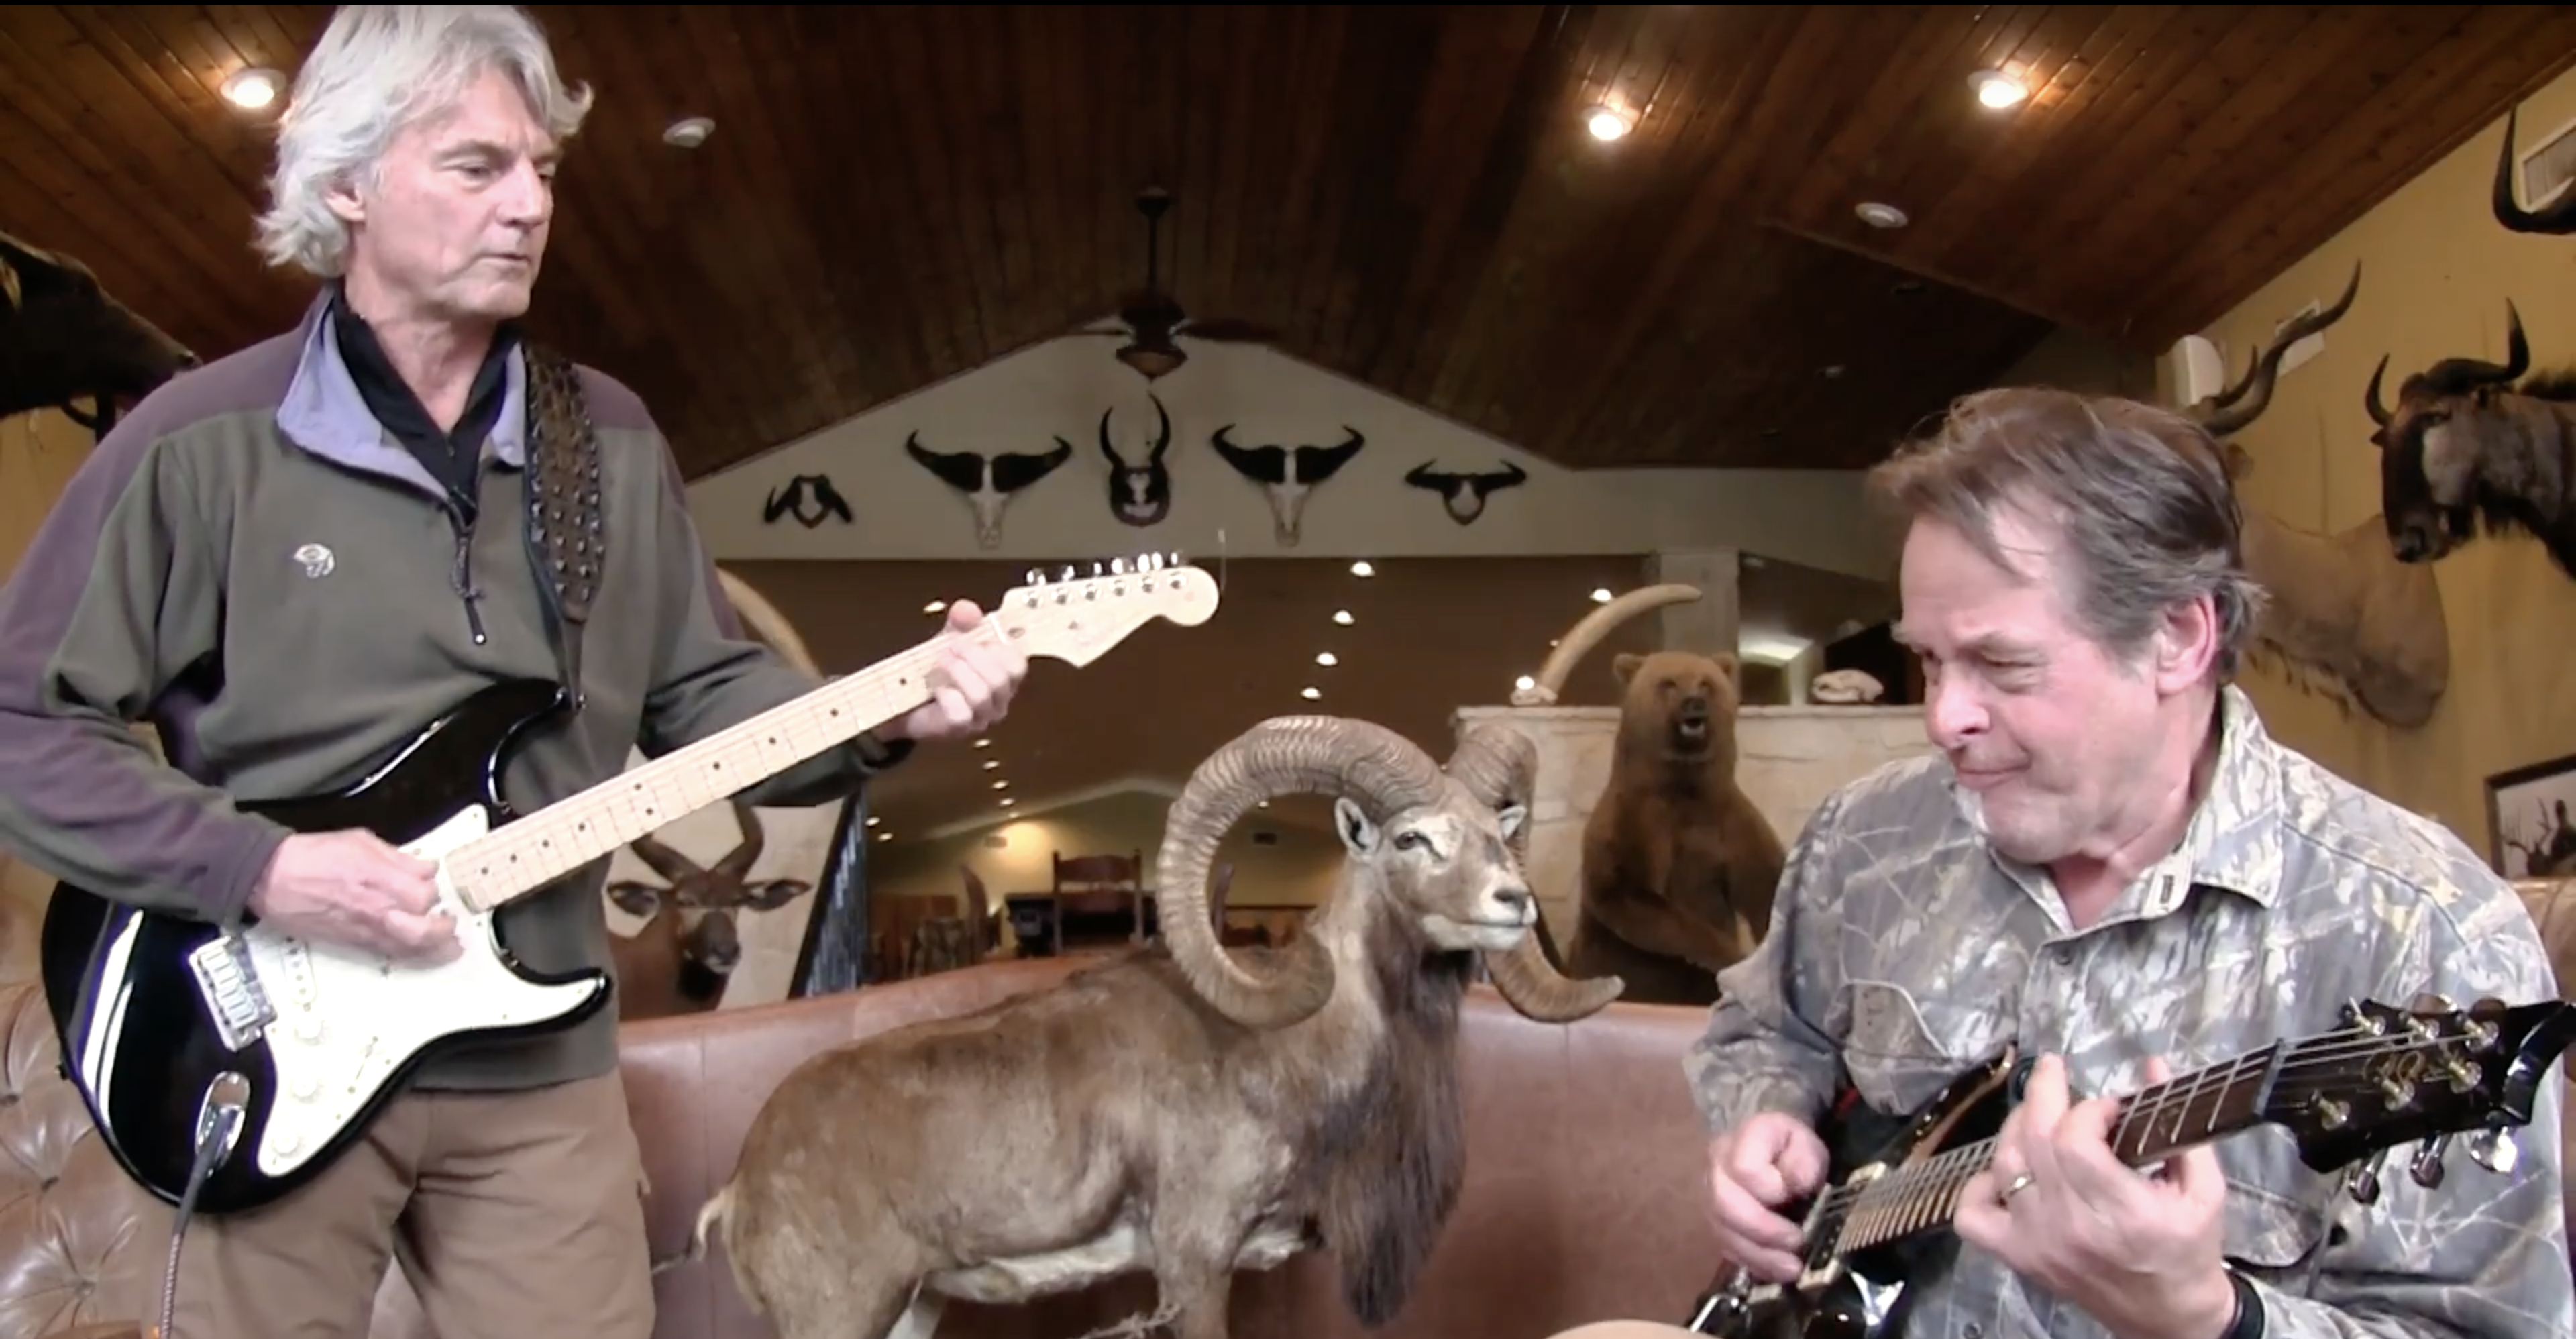 Nothing like an impromptu jam session between friends after a morning hunt! Starring Ted Nugent and J. Alain Smith!